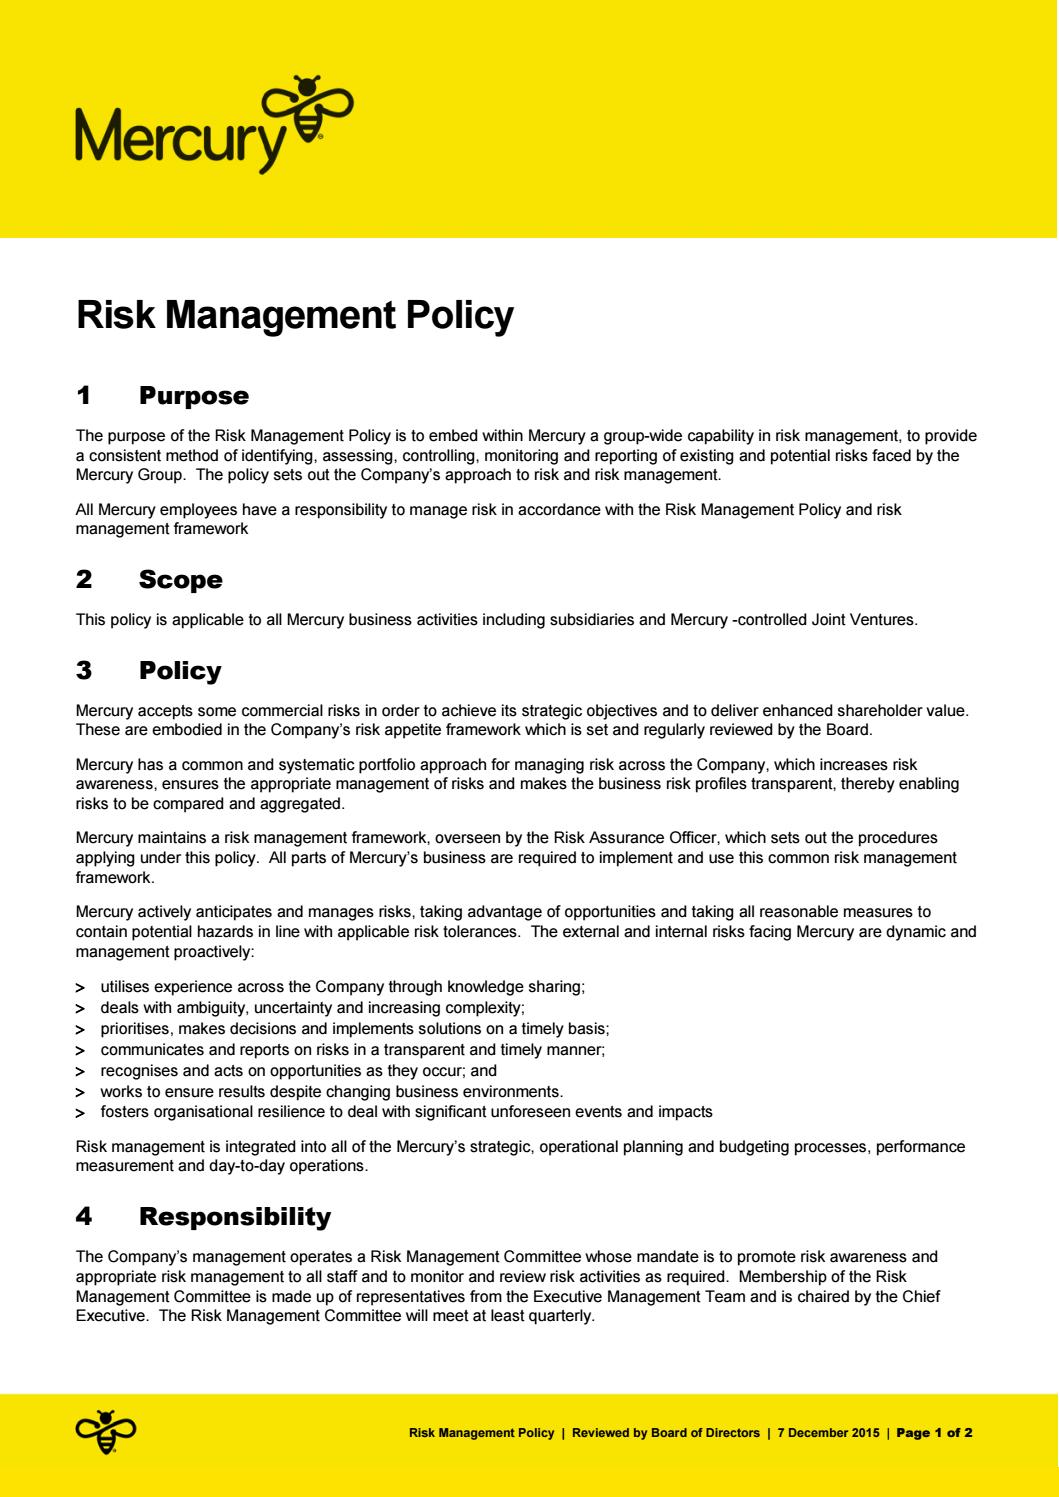 Risk management policy example